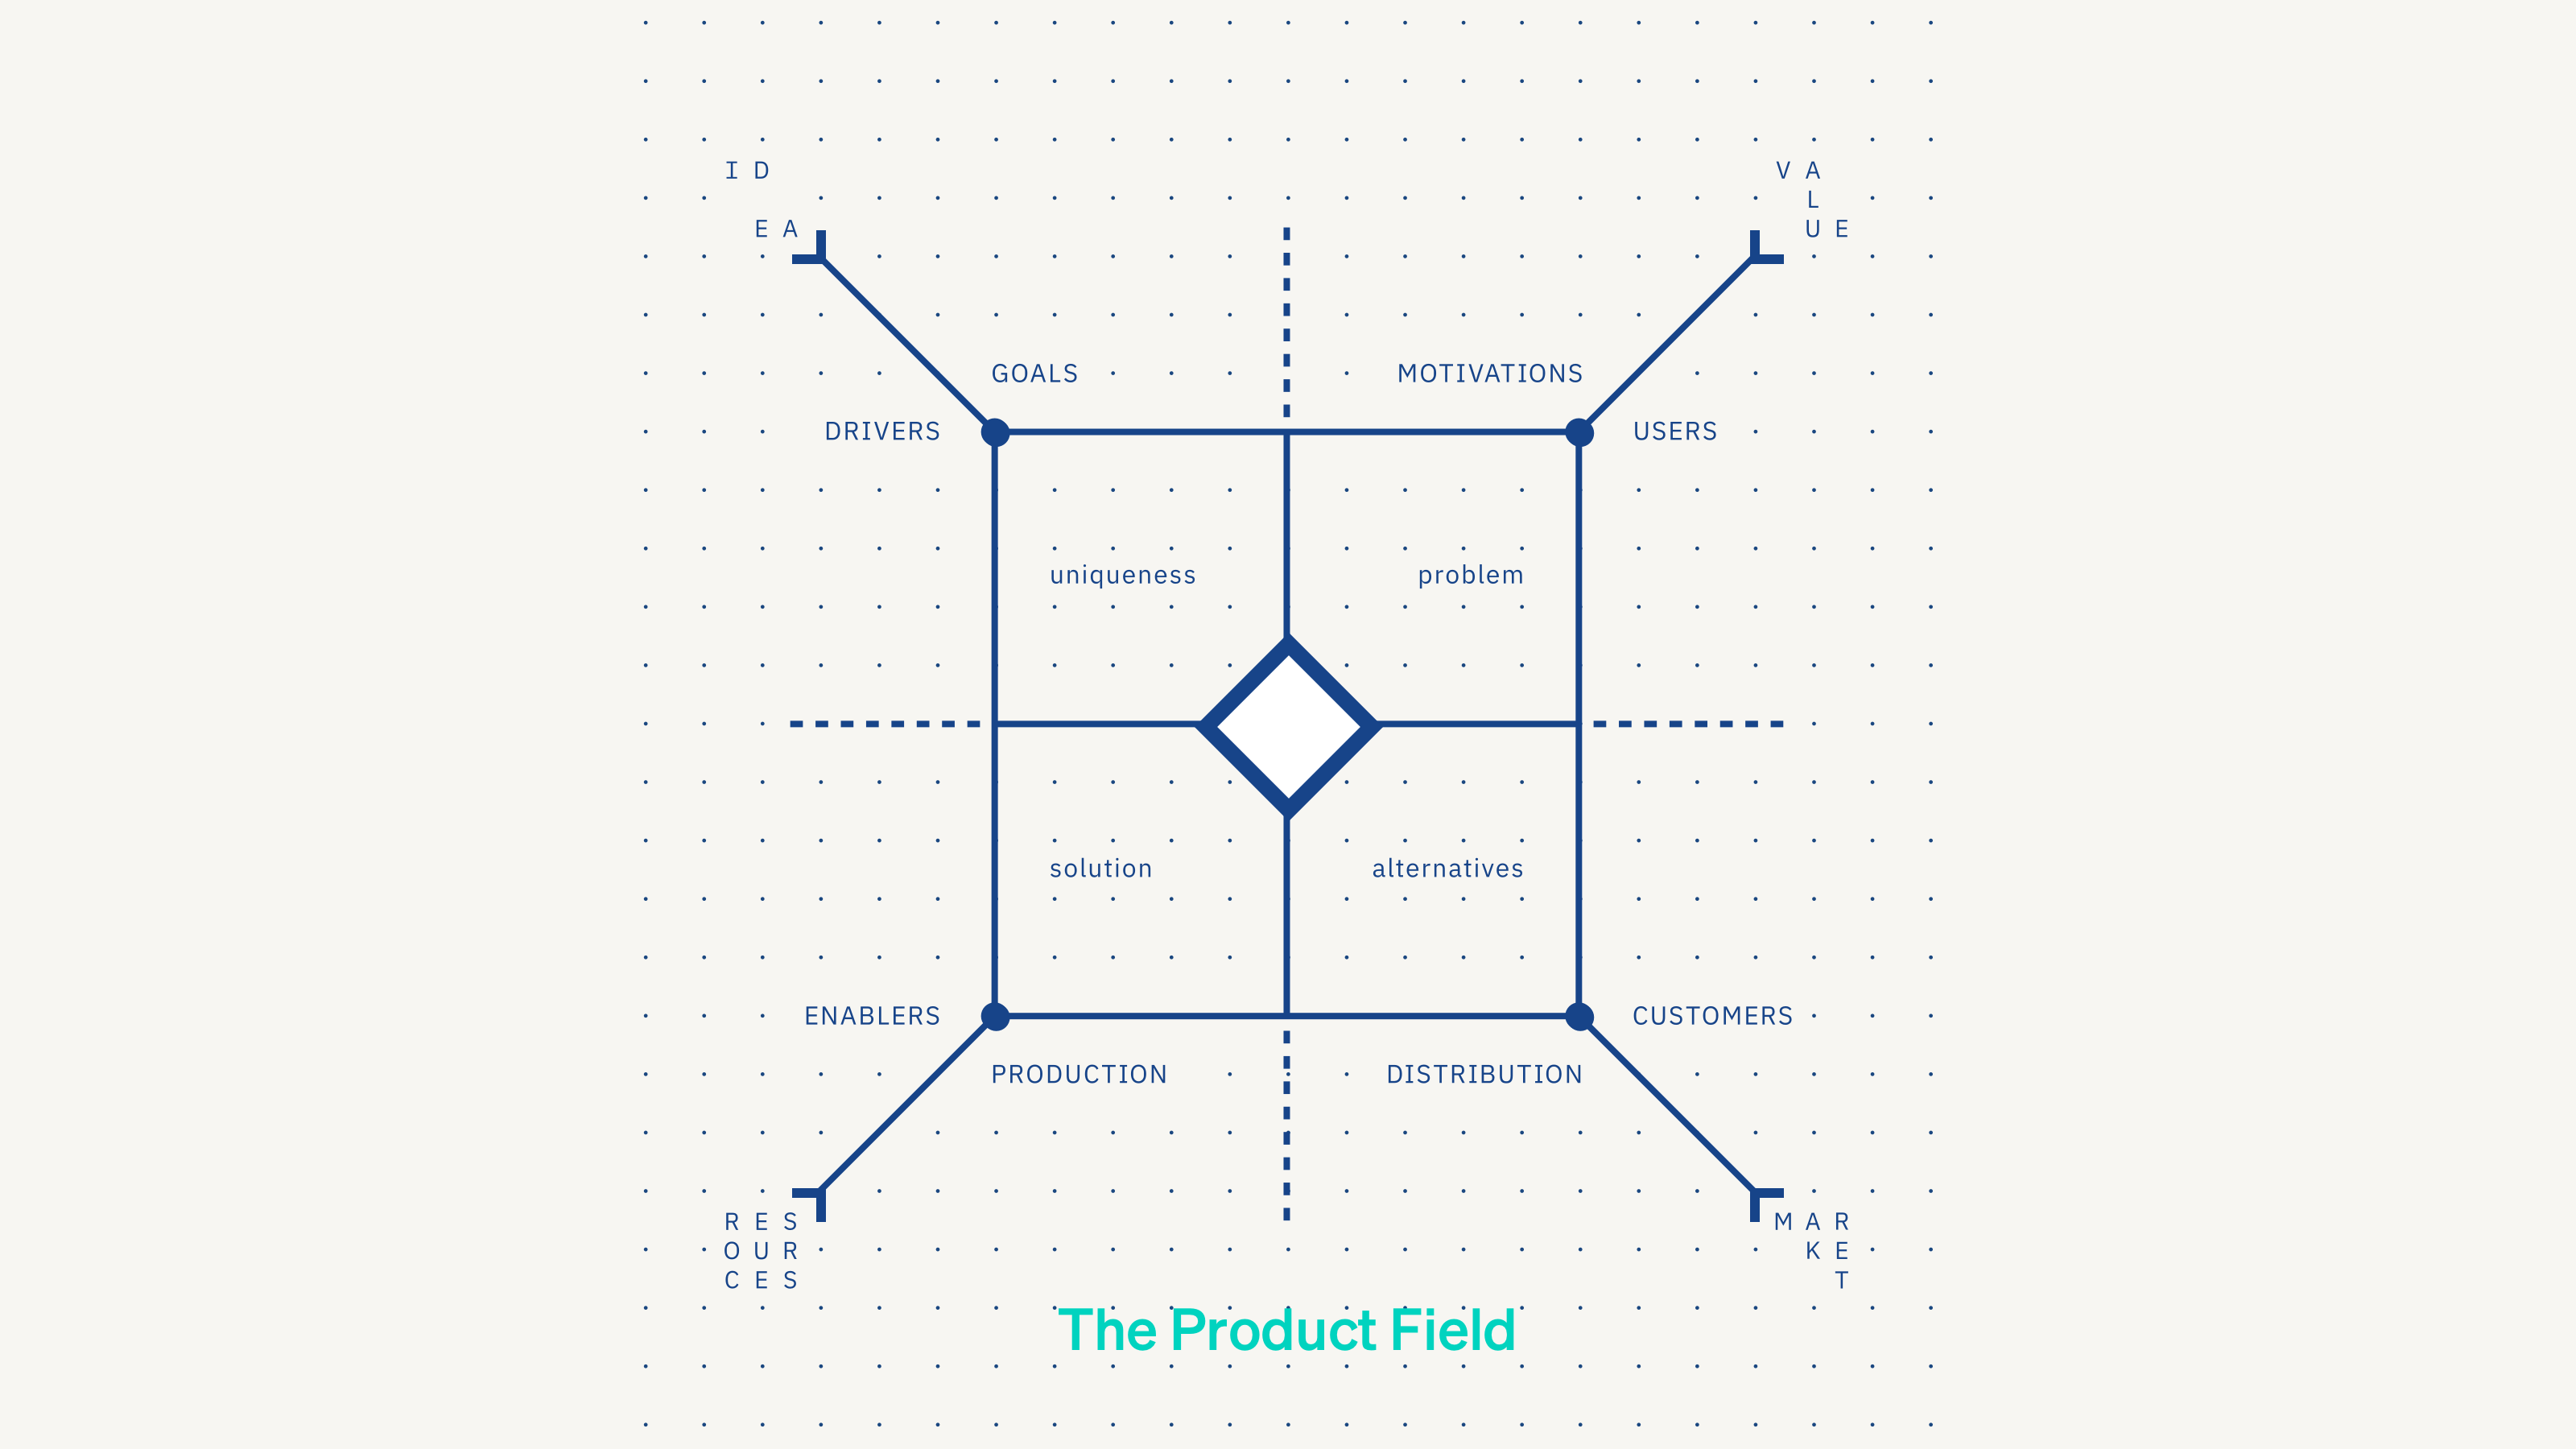 The Product Field